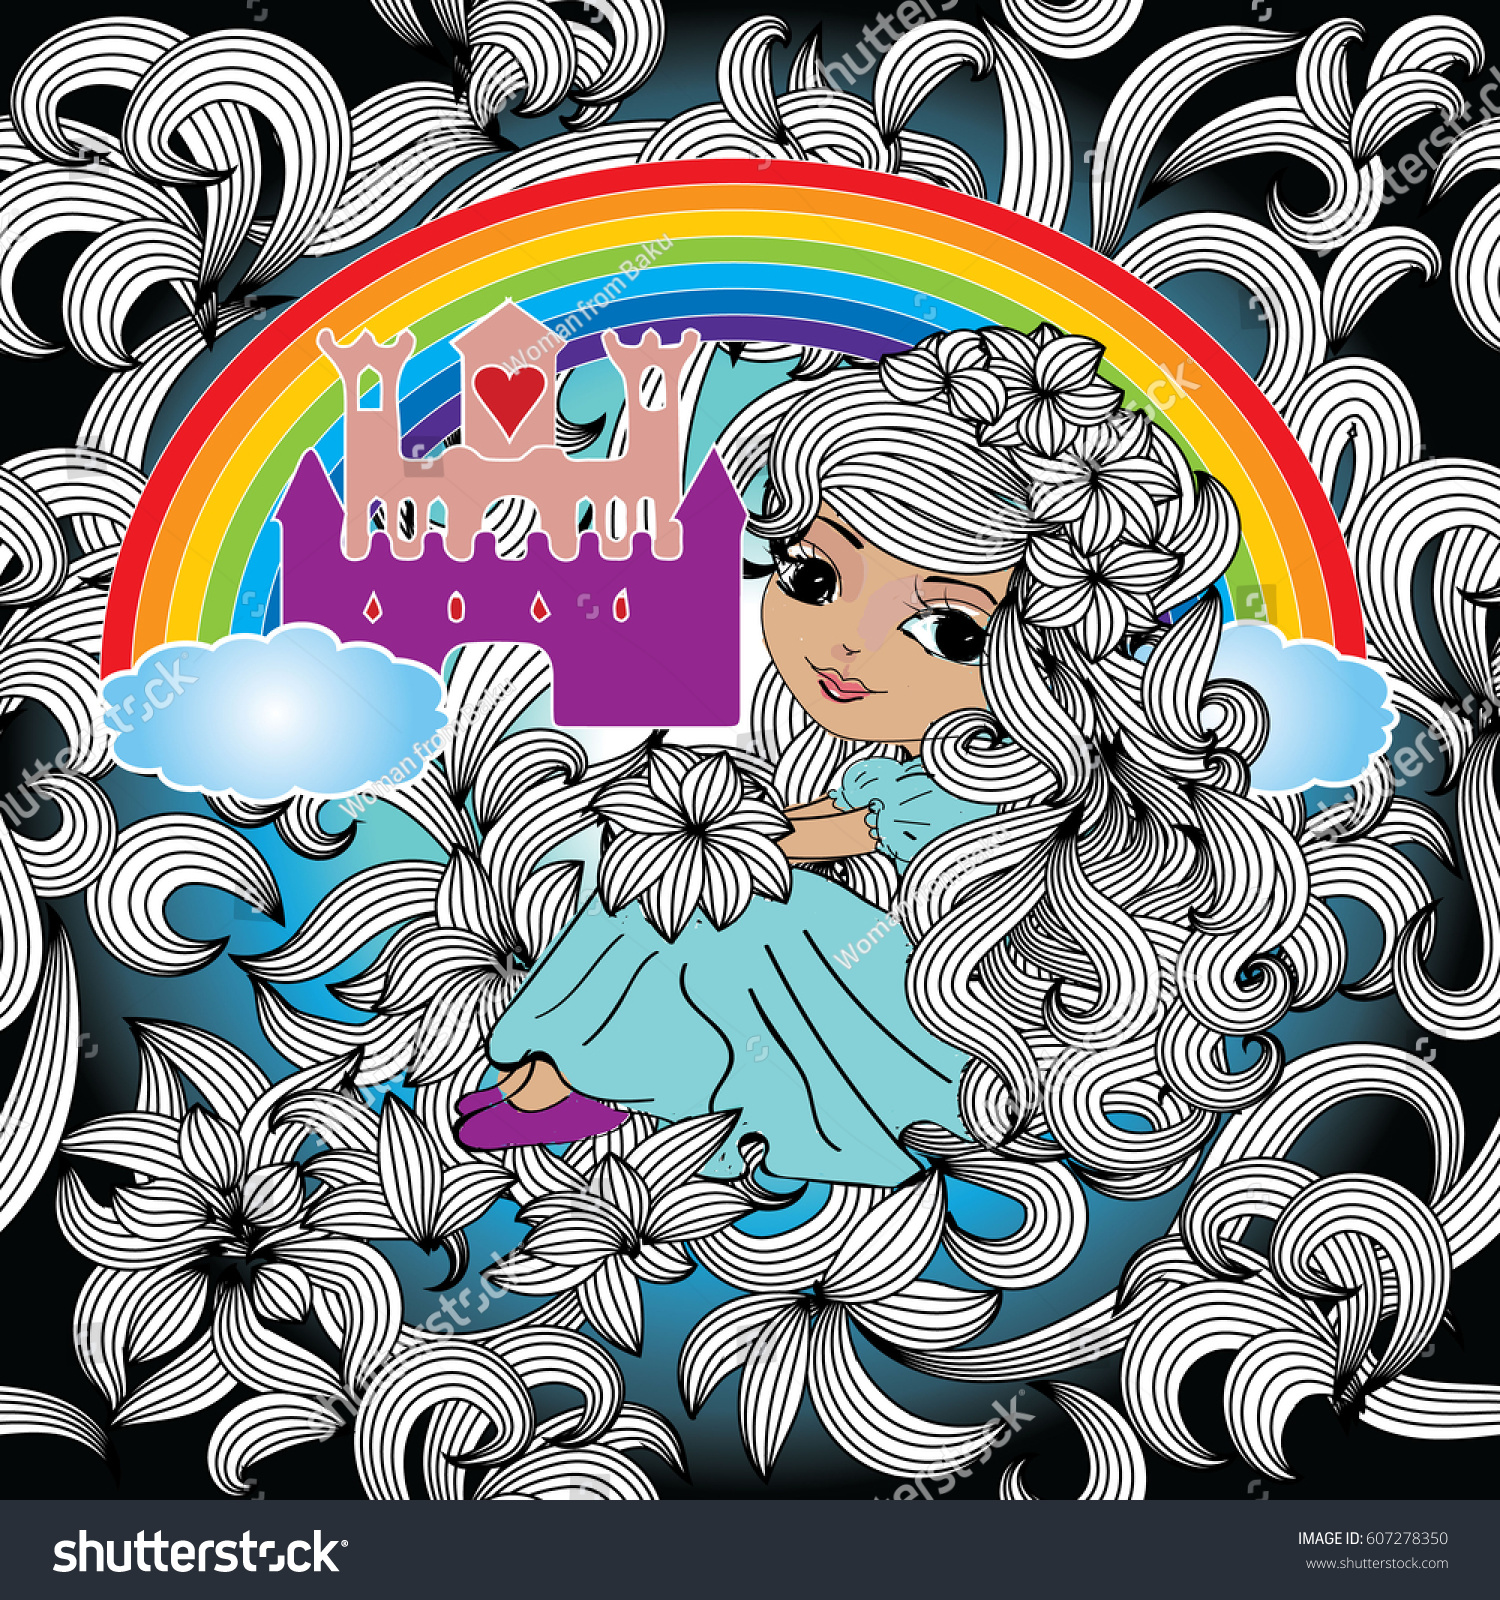 SVG of Fairytale seamless pattern. Floral background wallpaper illustration with colorful rainbow, princess castle, little beautiful girl with long curly hairs and flowers. Vector texture for fabric,prints svg